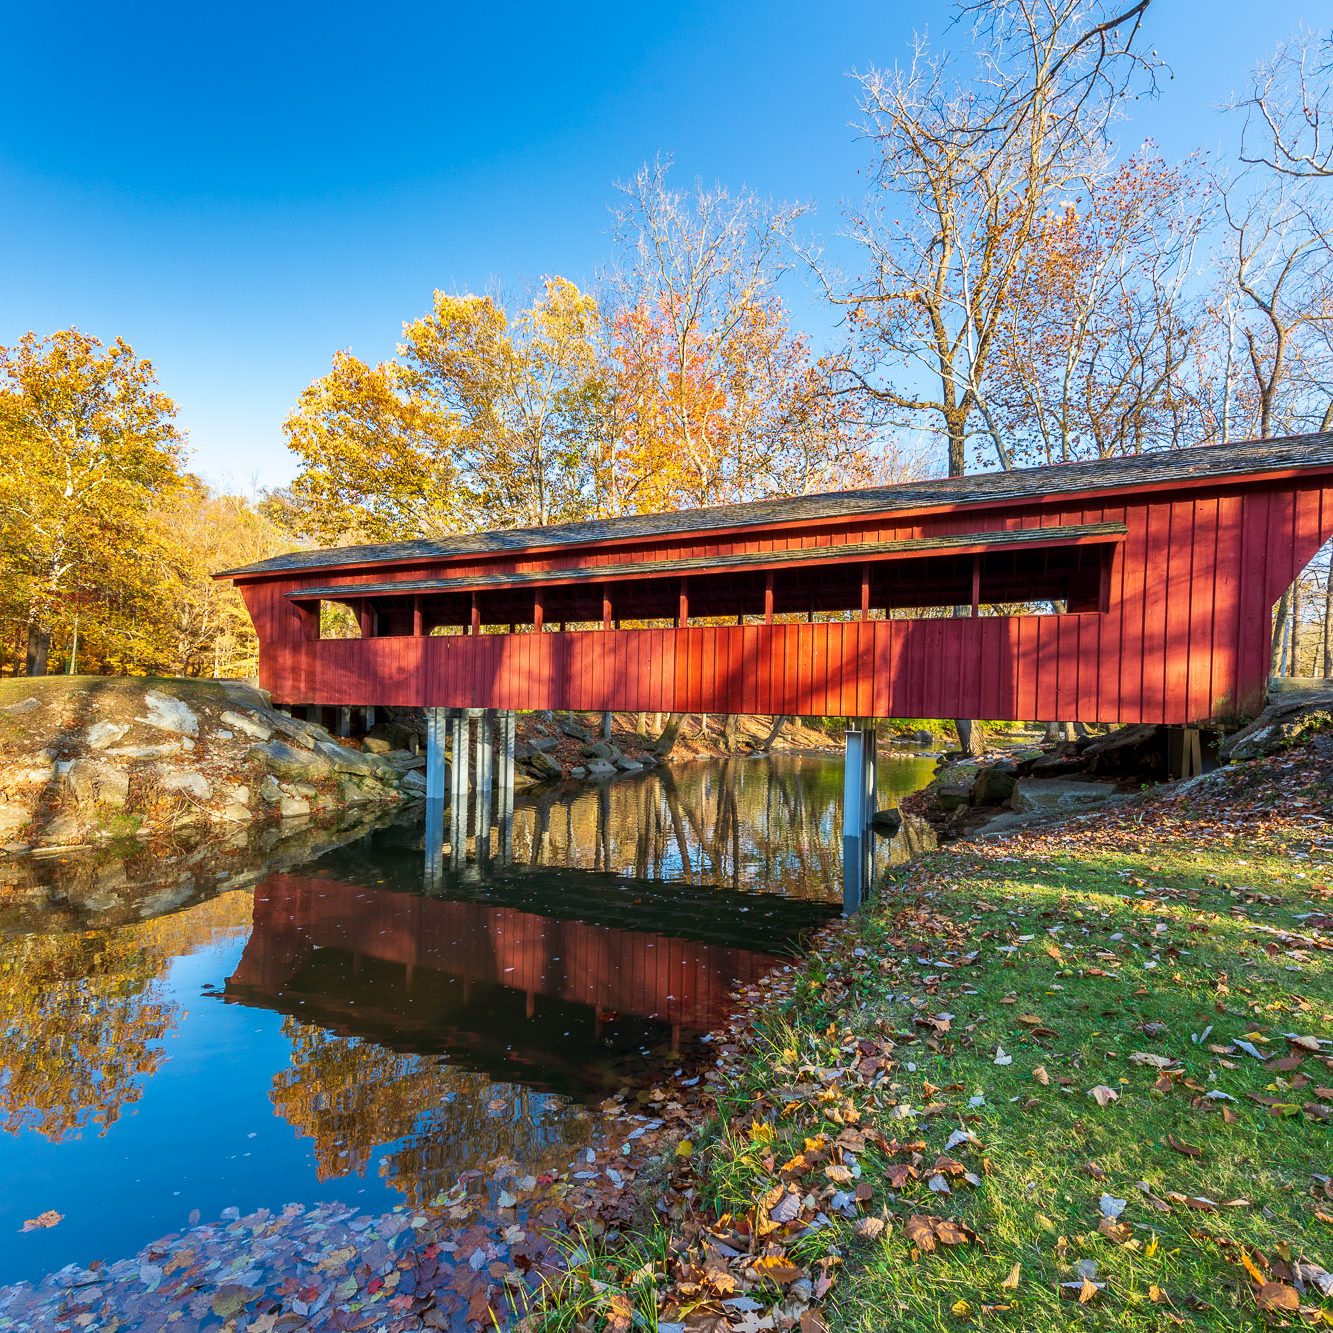 The Ross Covered Bridge resides in Tawawa Park, Sidney Ohio.  The wood bridge (also known as Sidney Ohio’s covered bridge) was constructed in 1971 but drew its design from central Ohio pioneer bridge builder Rueben L. Partridge.  Today, the bridge spans Tawawa Creek as it meanders through the park.  In this golden hour image, the red bridge basks in warm light and the thinning autumn leaves and clear blue sky.